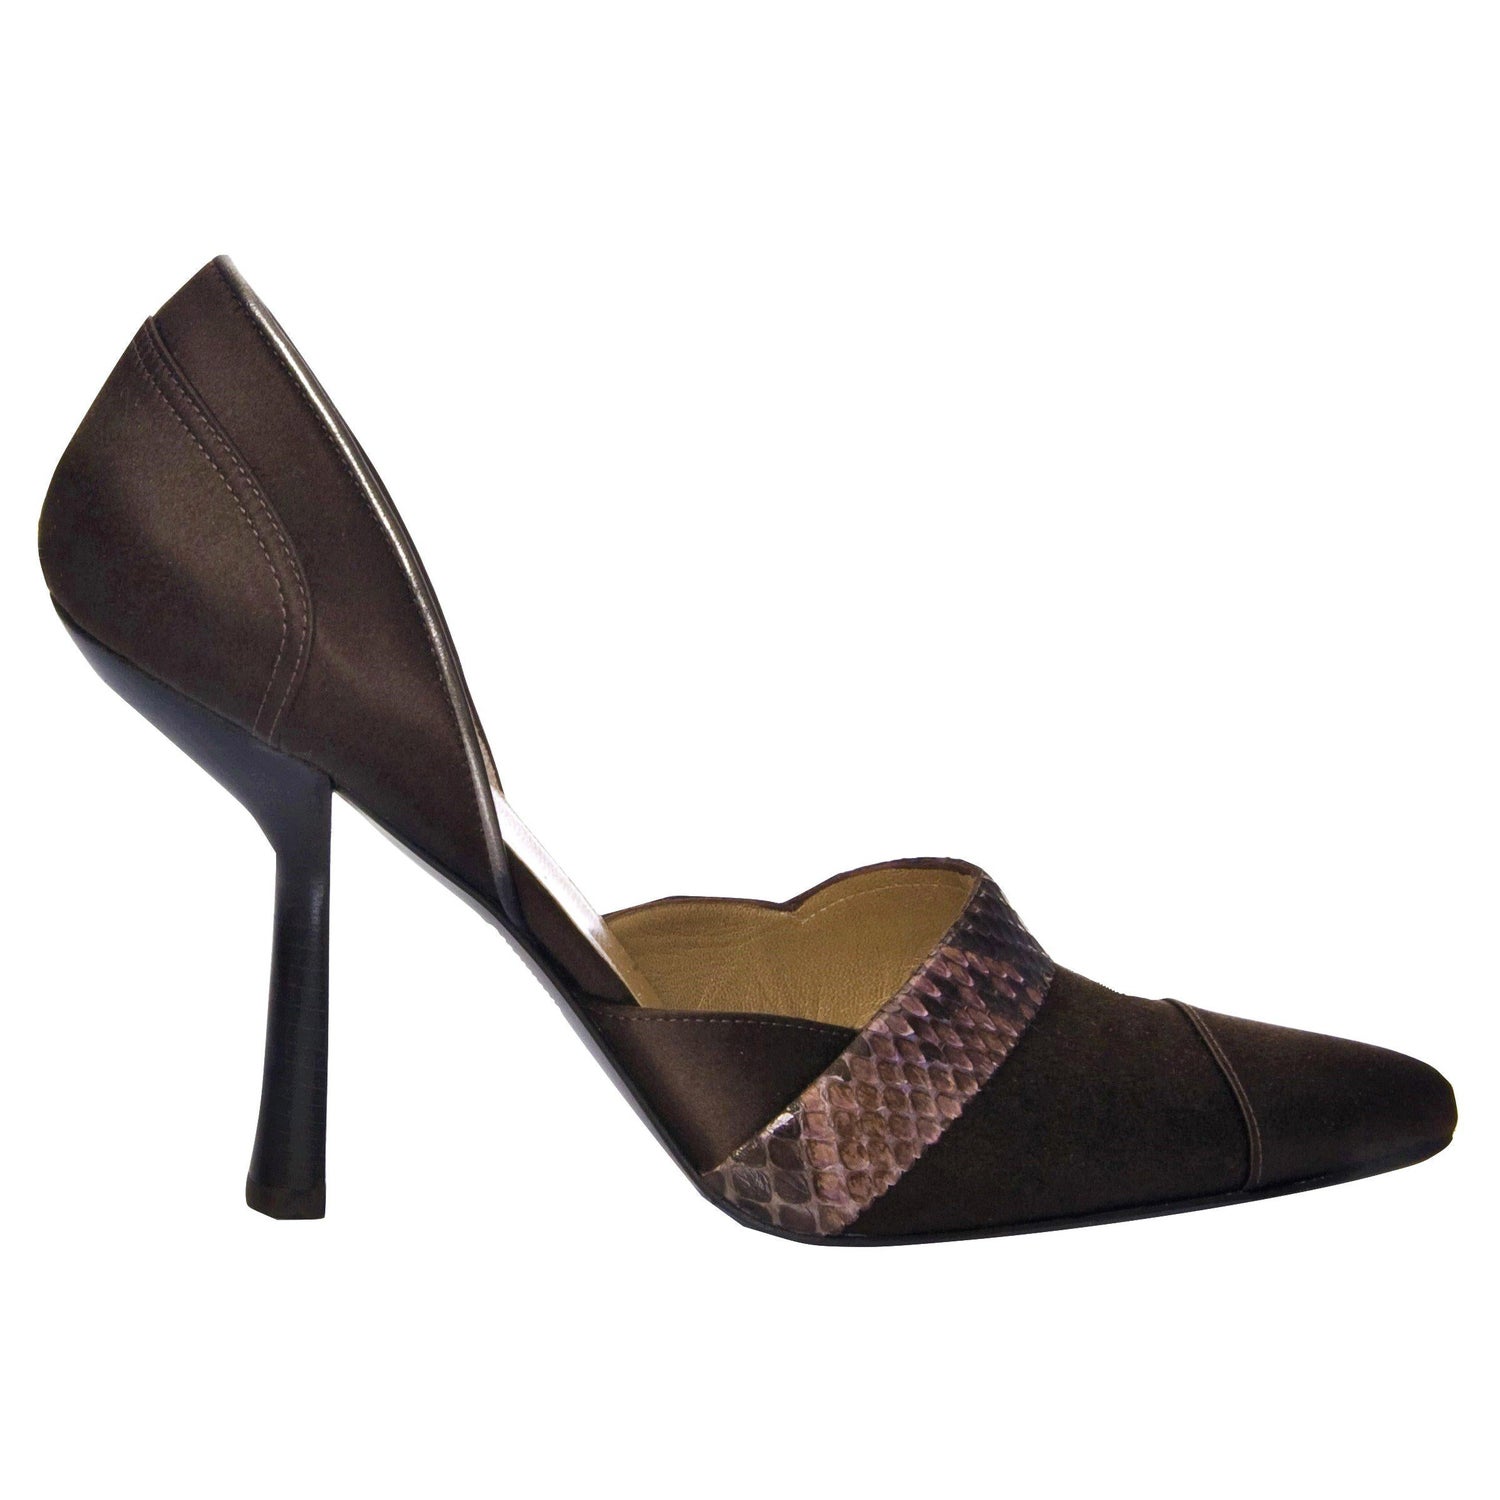 Christopher nemeth pointed toe shoes